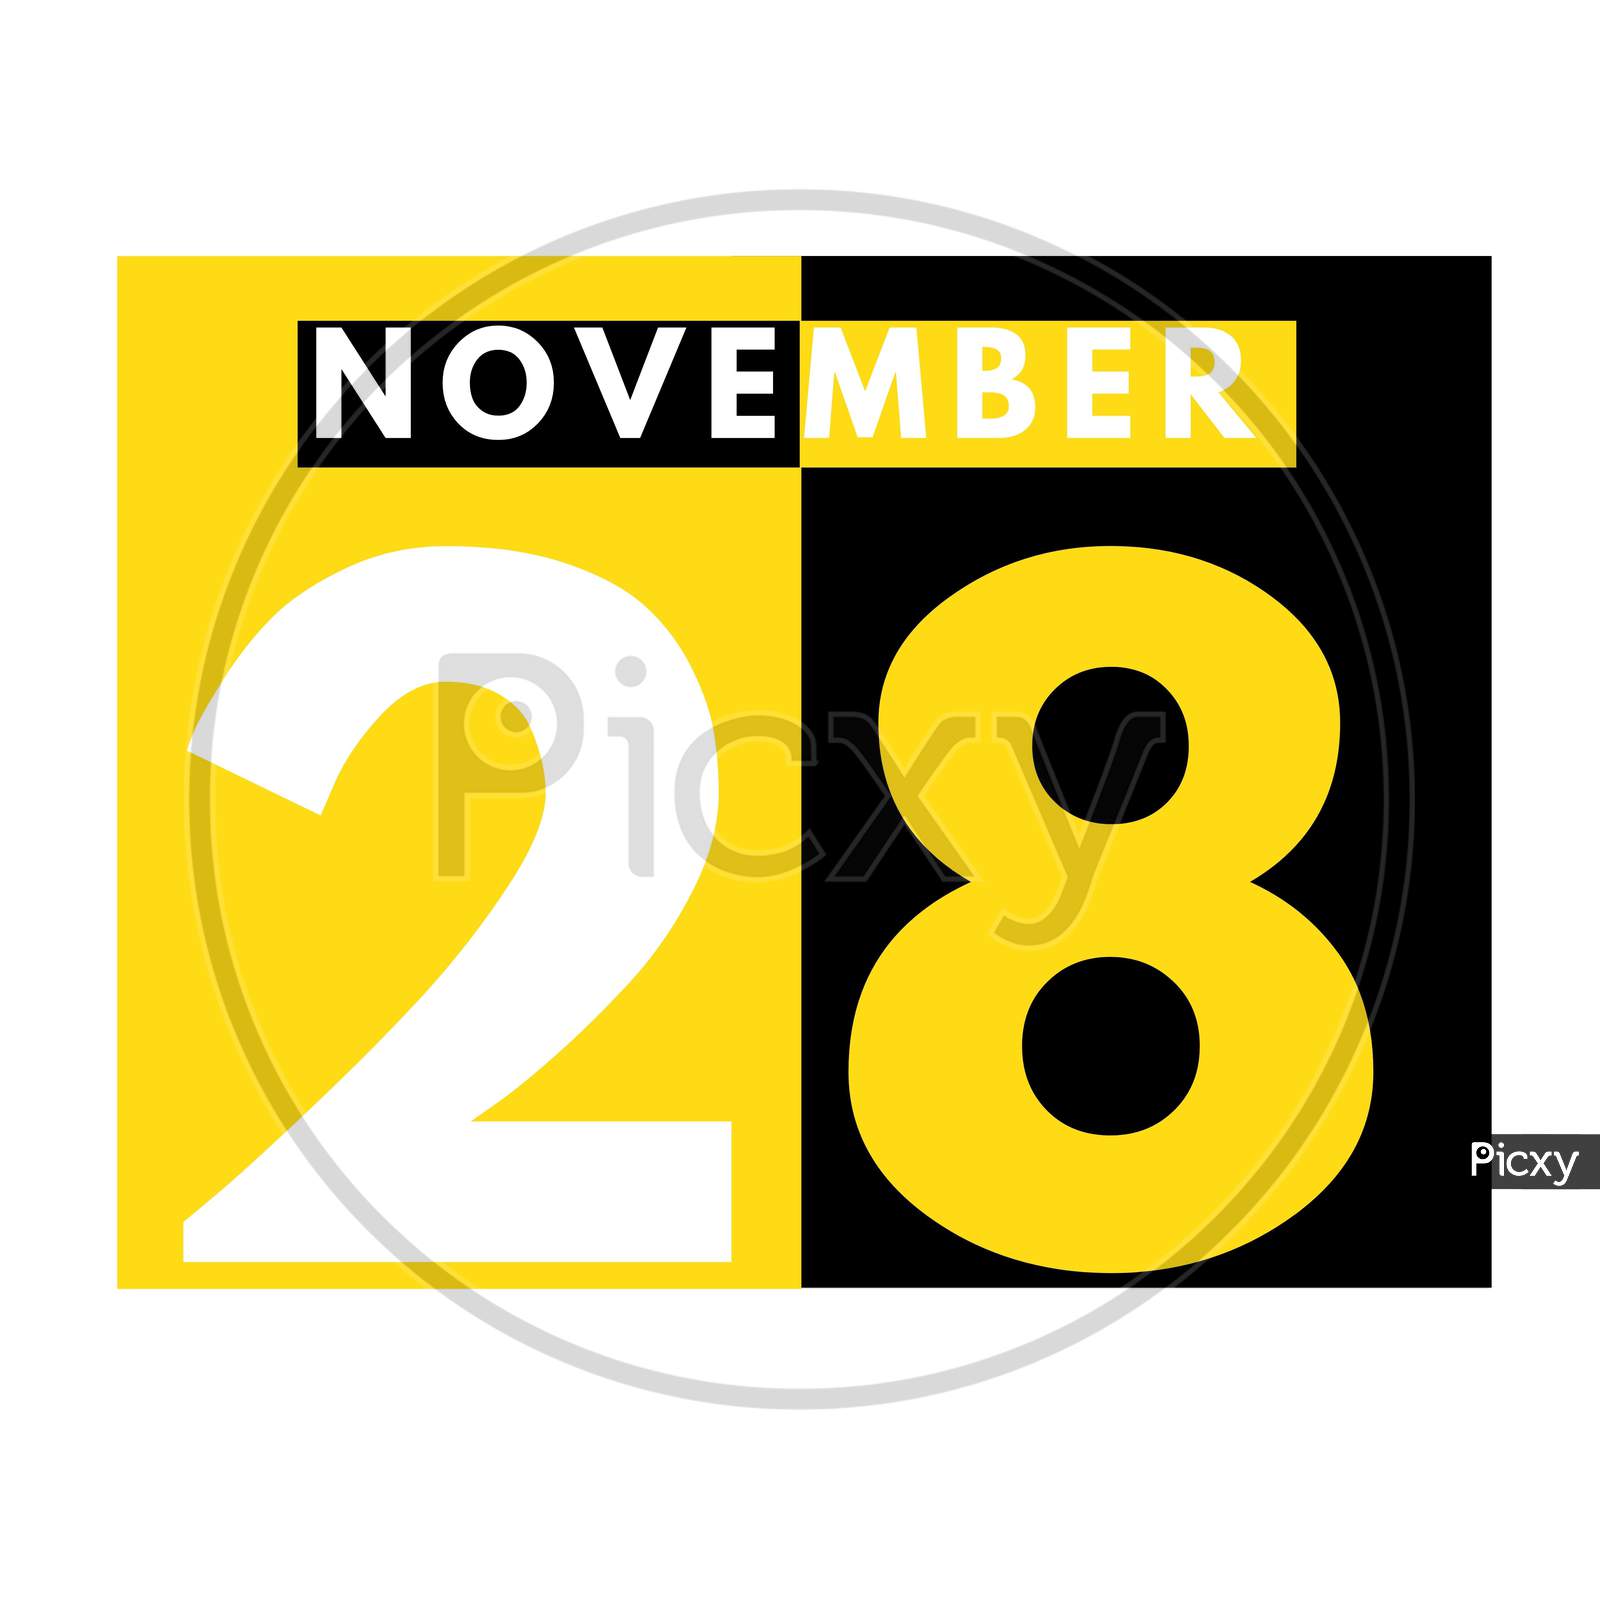 November 28 . Modern Daily Calendar Icon .Date ,Day, Month .Calendar For The Month Of November